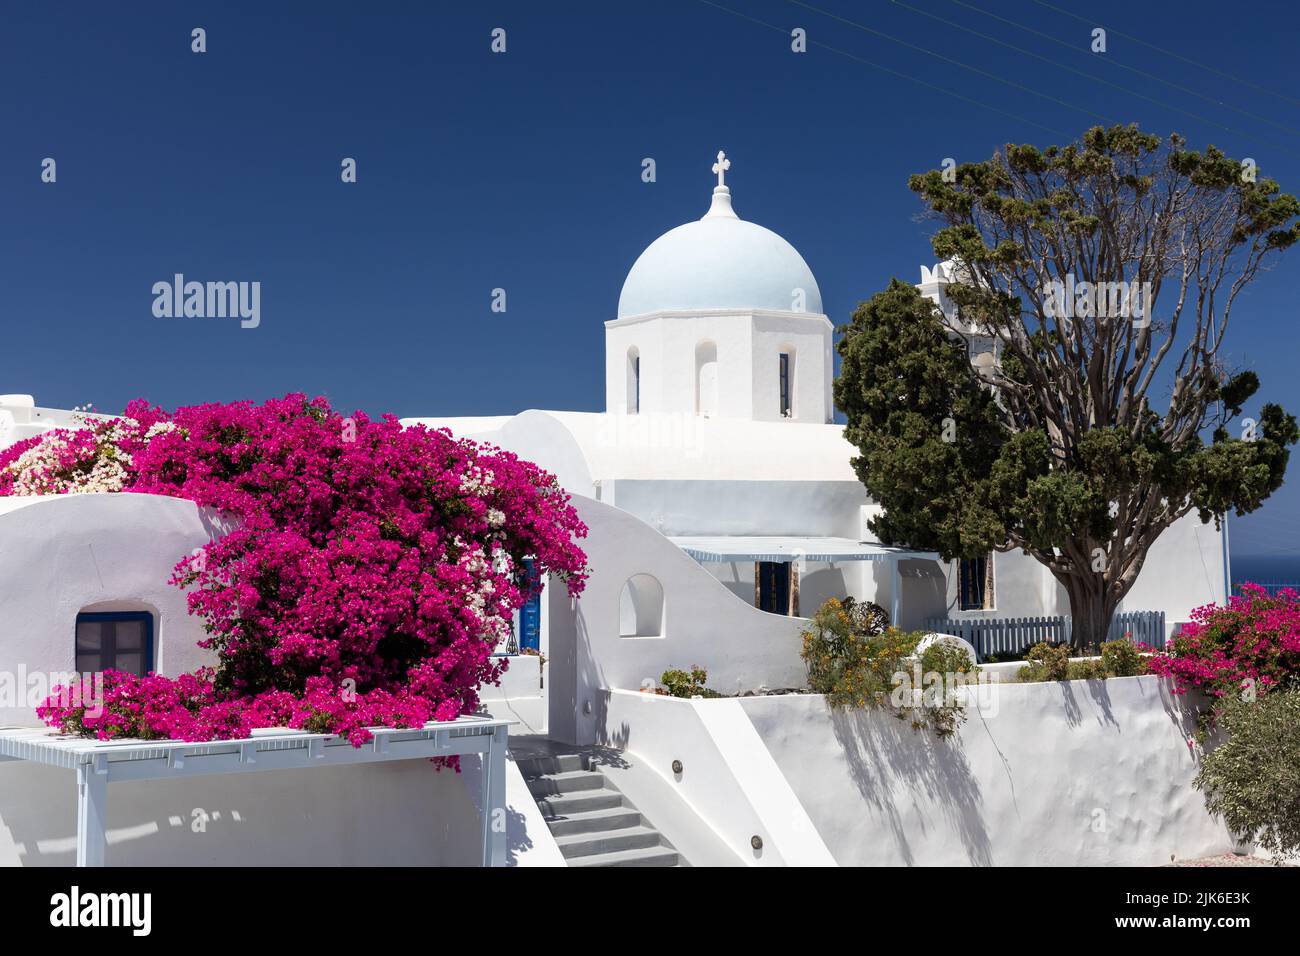 Picturesque whitewashed church, holiday accommodation with bright flowering bougainvillea, Aghios Artemios Traditional Houses, Santorini, Greece, EU Stock Photo